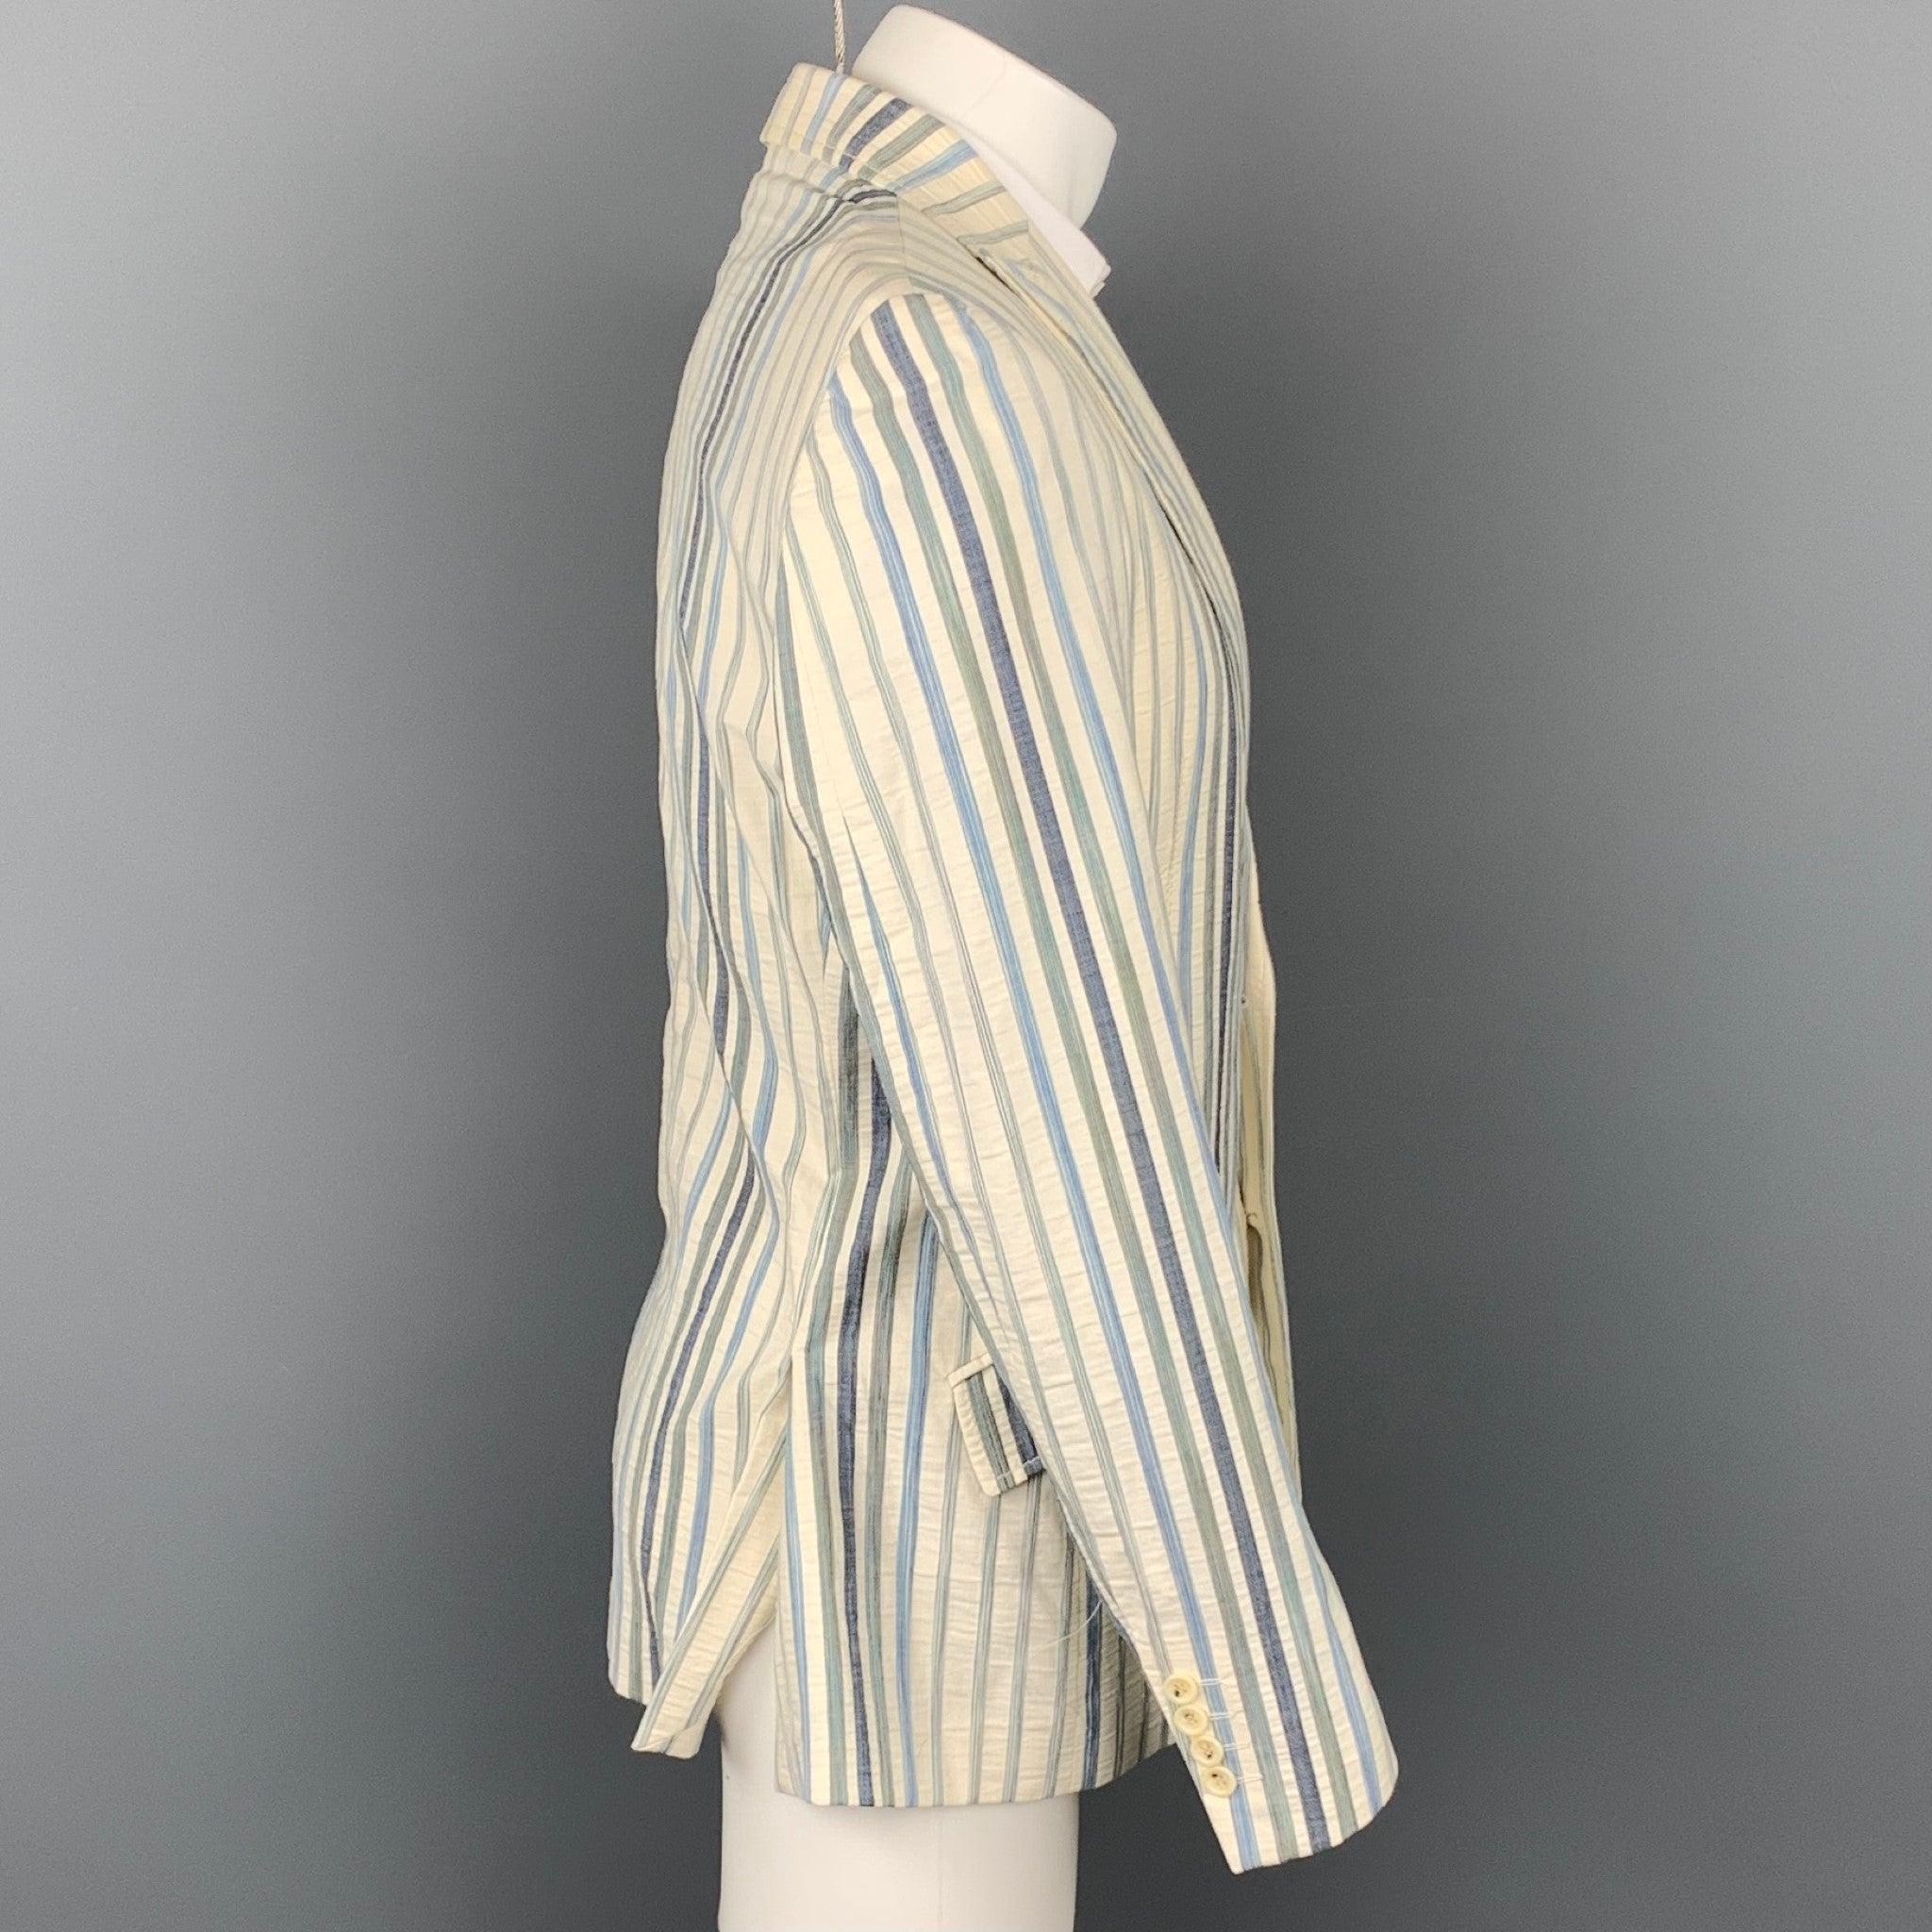 JUST CAVALLI sport coat comes in a cream & blue stripe cotton blend with a snake skin print half liner featuring a peak lapel, flap pockets, and a two button closure. Made in Italy.Very Good
 Pre-Owned Condition. 
 

 Marked:  IT 50 
 

